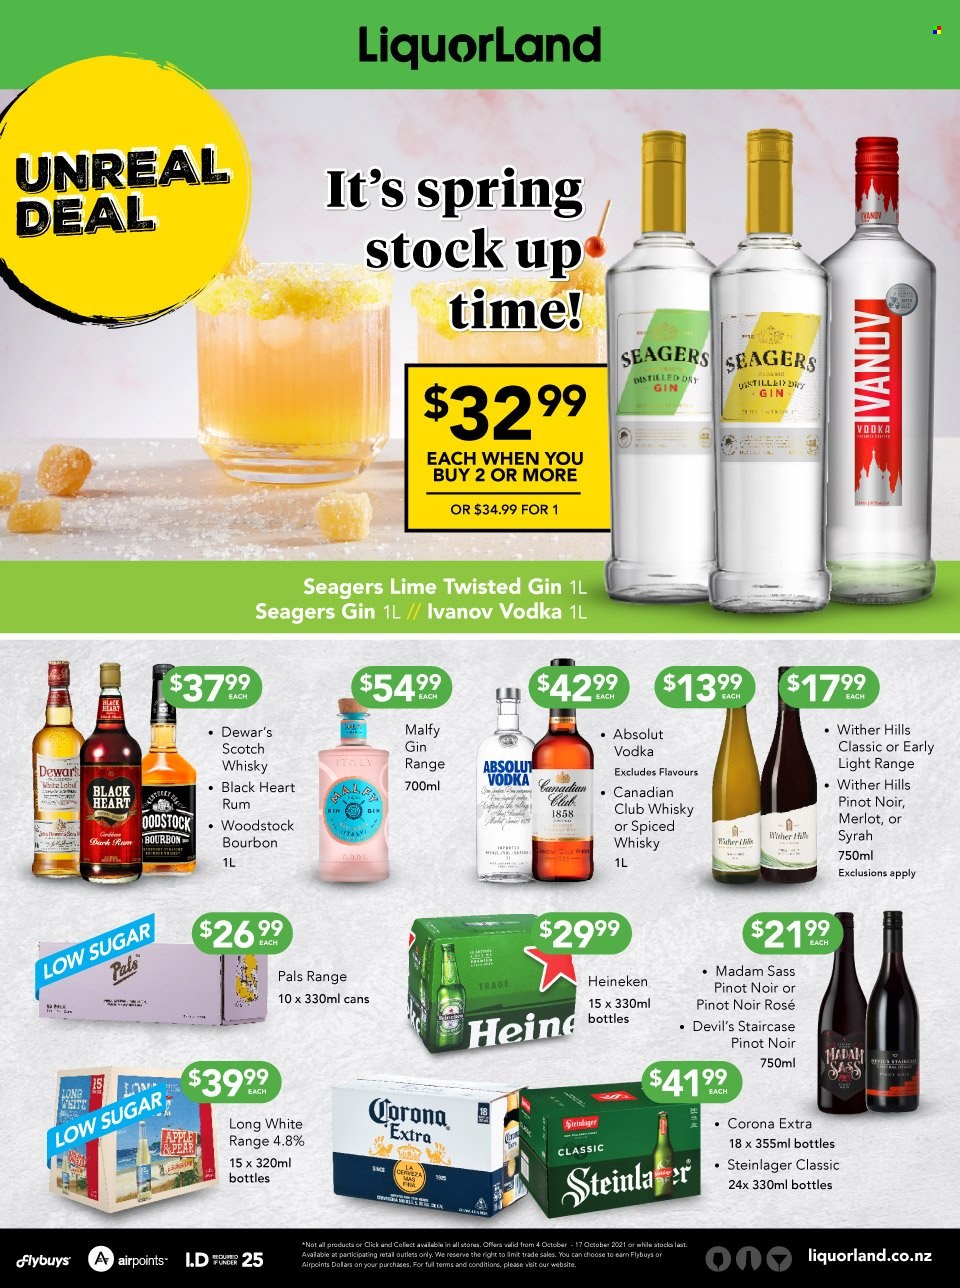 thumbnail - Liquorland mailer - 04.10.2021 - 17.10.2021 - Sales products - red wine, wine, Merlot, Pinot Noir, Wither Hills, Syrah, rosé wine, bourbon, gin, rum, vodka, Absolut, whisky, beer, Corona Extra, Heineken, Steinlager. Page 1.